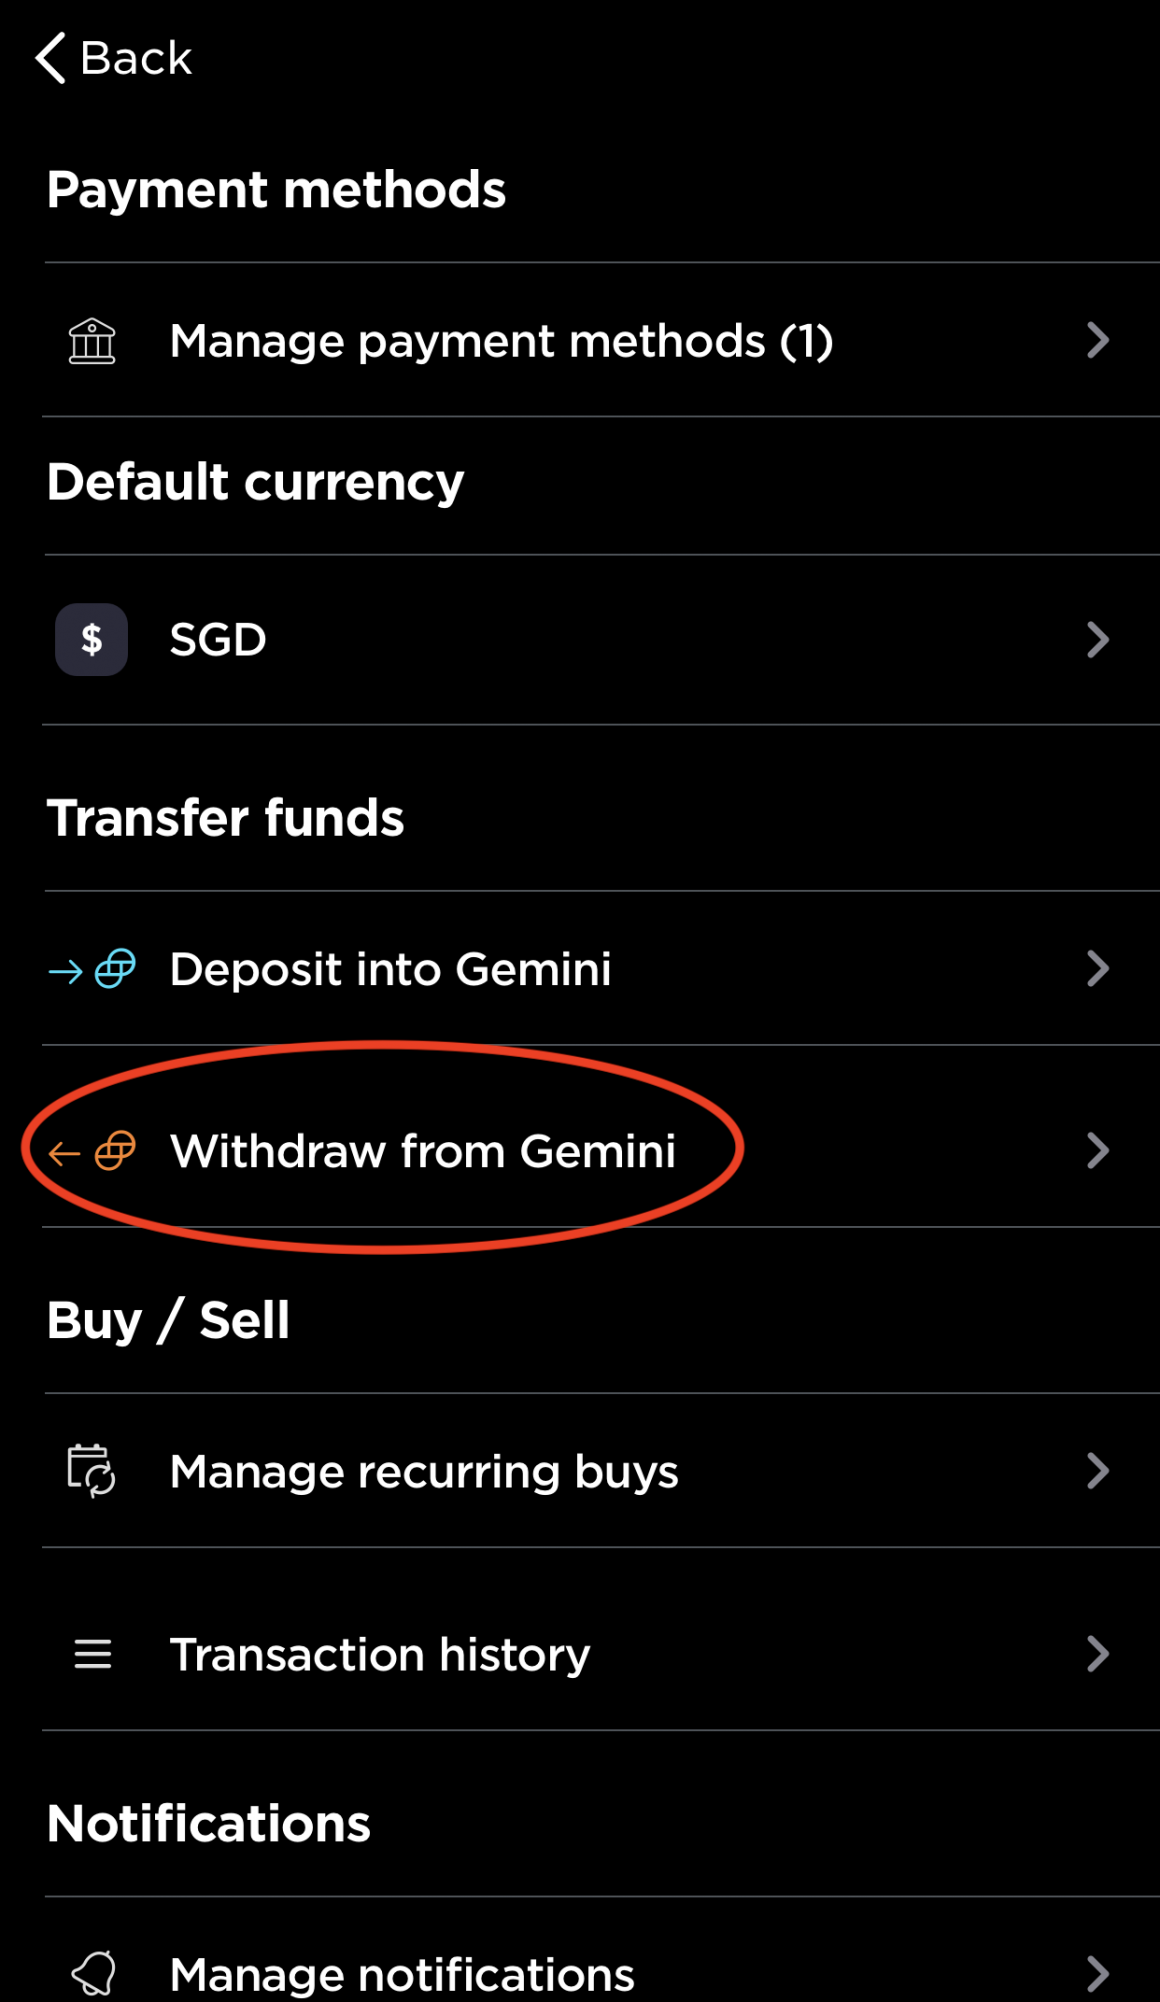 The Ultimate Guide To Investing With Gemini | Financially ...